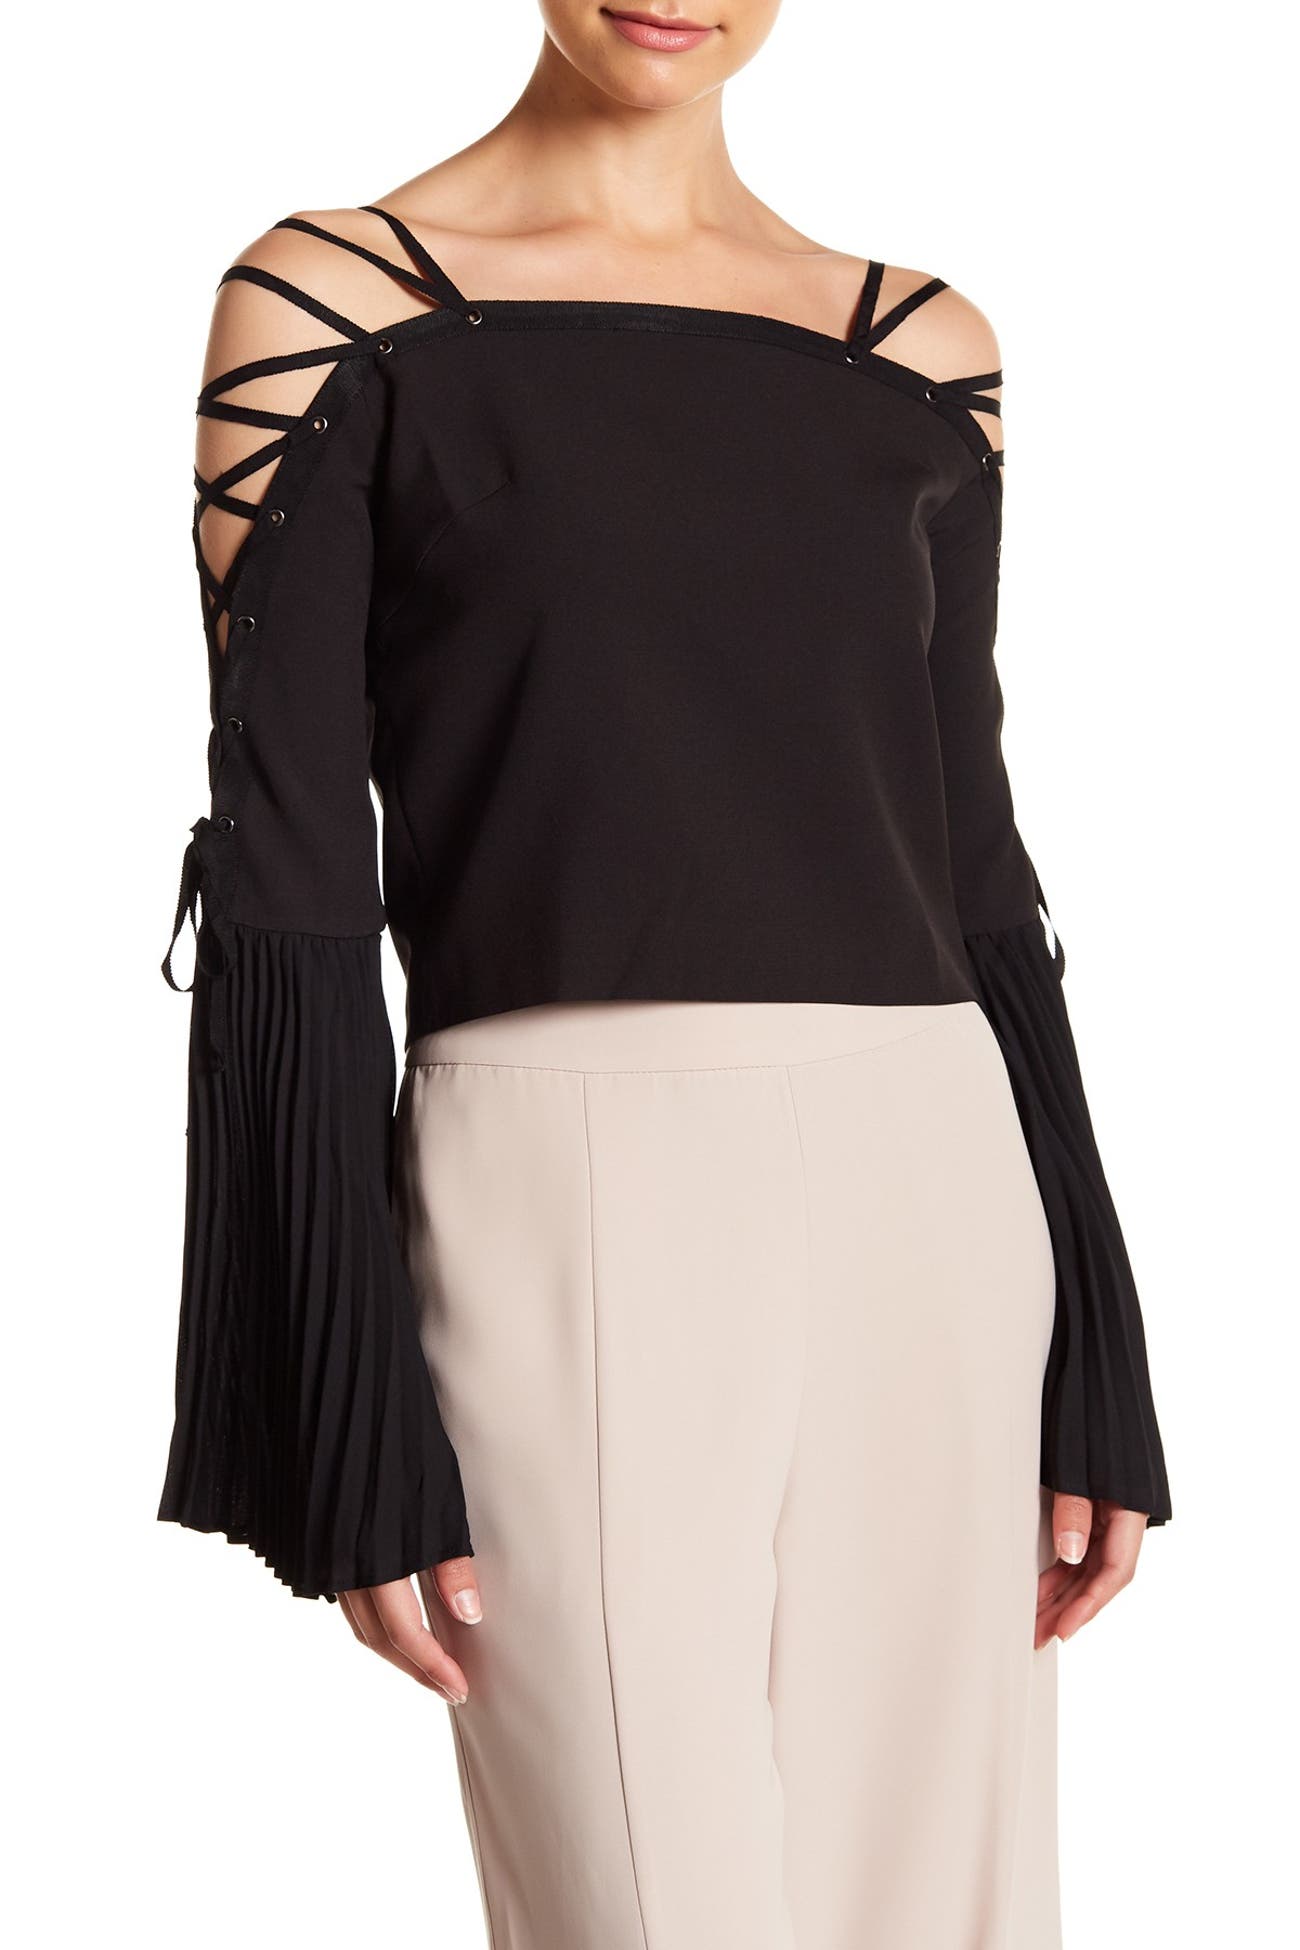 Gracia | Pleated & Lace-Up Sleeve Blouse | Nordstrom Rack